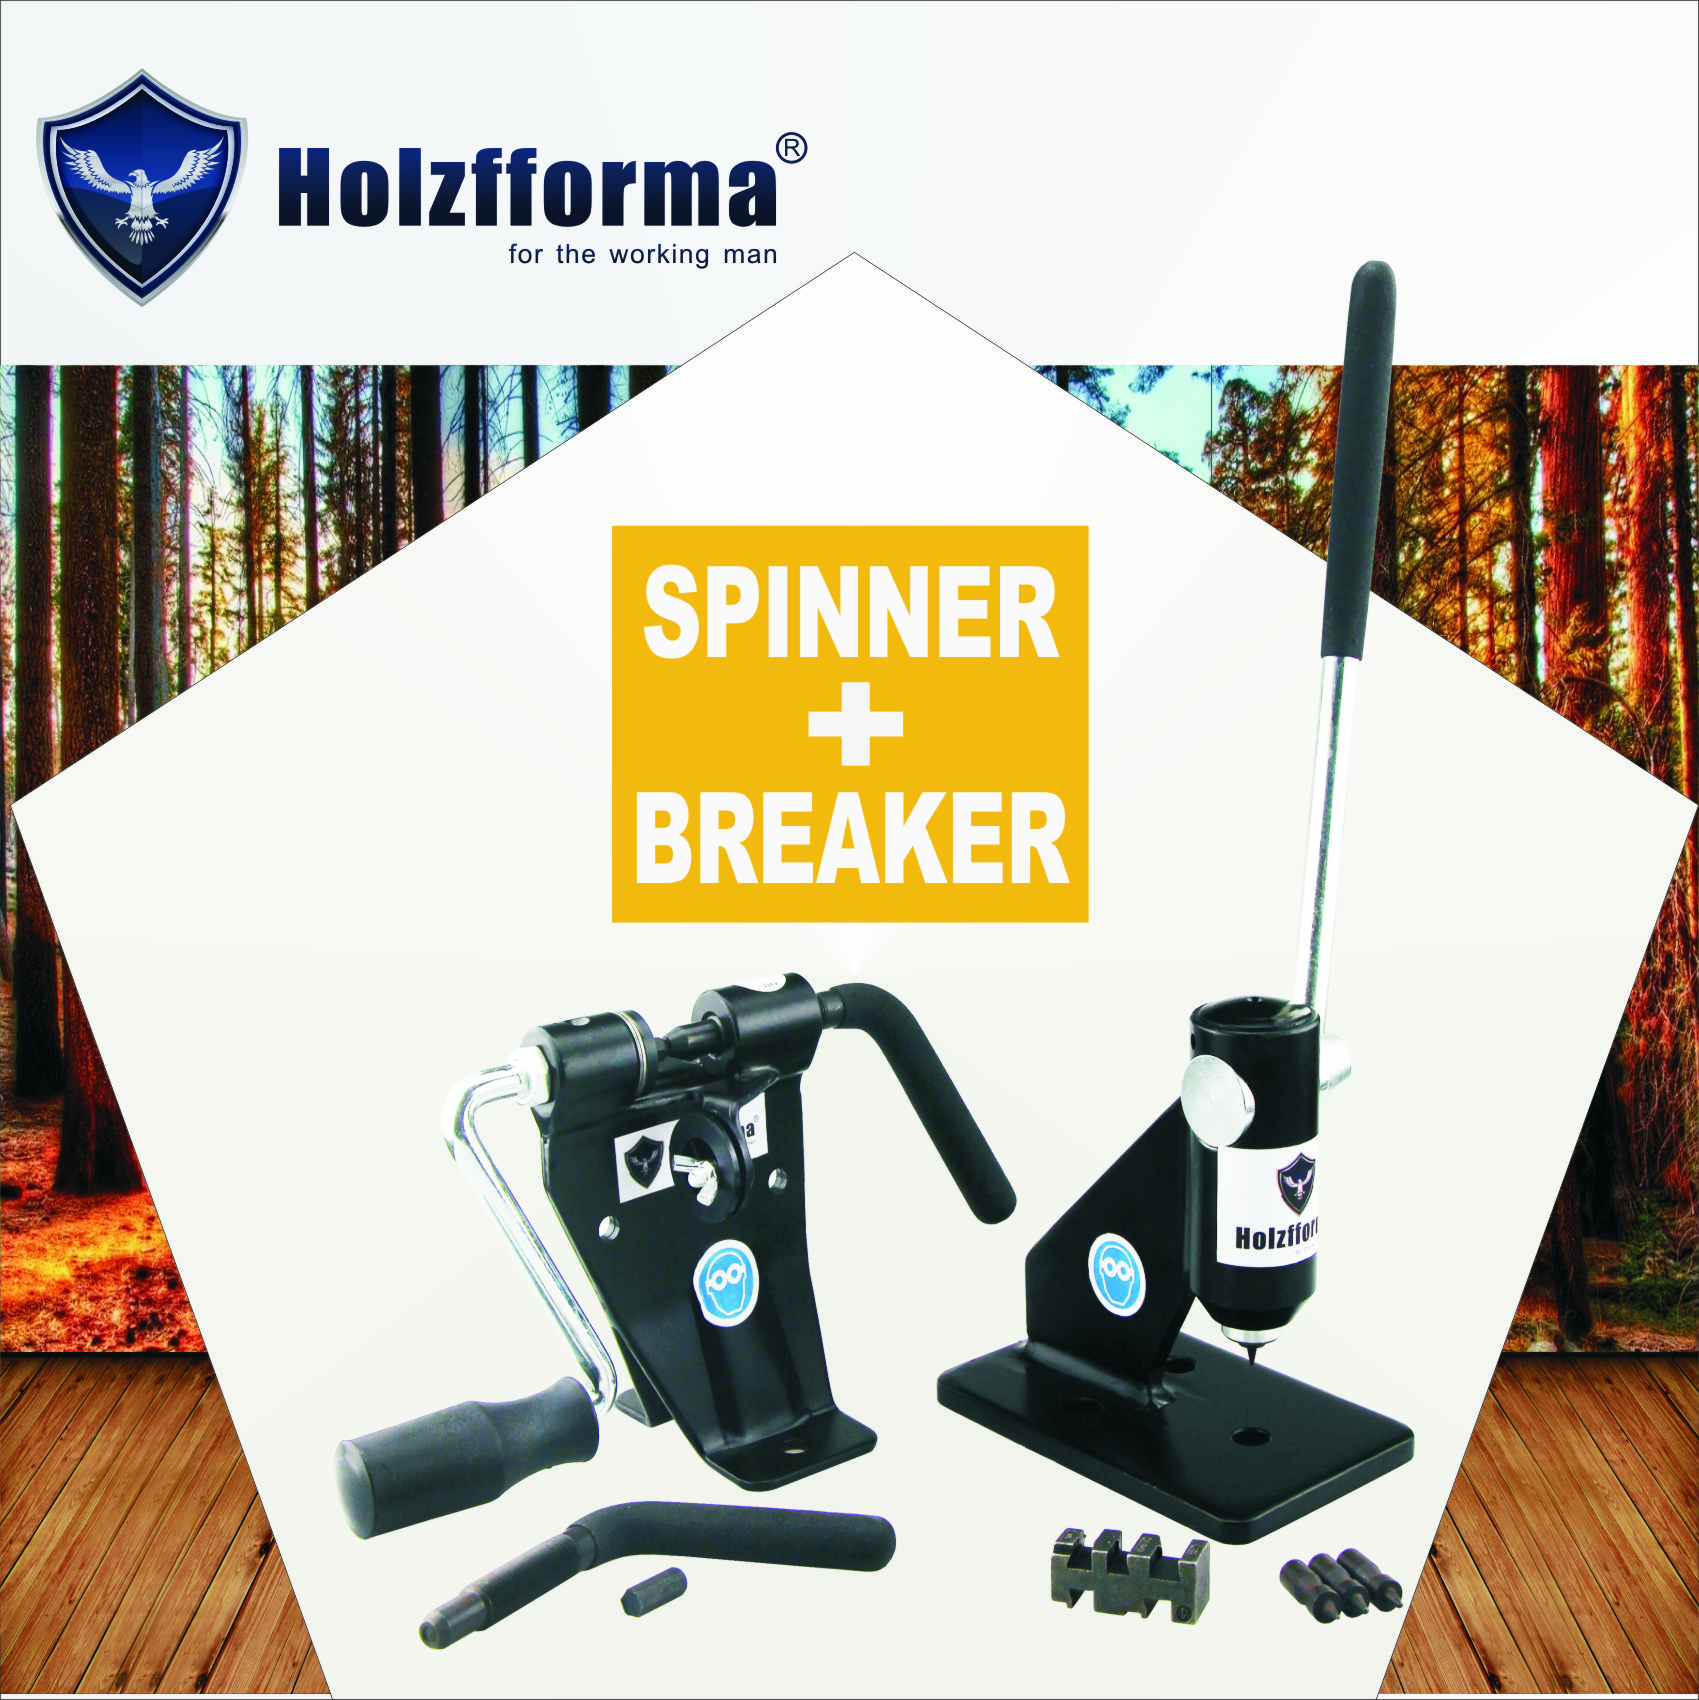 US STOCK - Holzfforma® Saw Chain Breaker Spinner Combo Pro Tool Set 2-4 Days Delivery Time Fast Shipping For US Customers Only